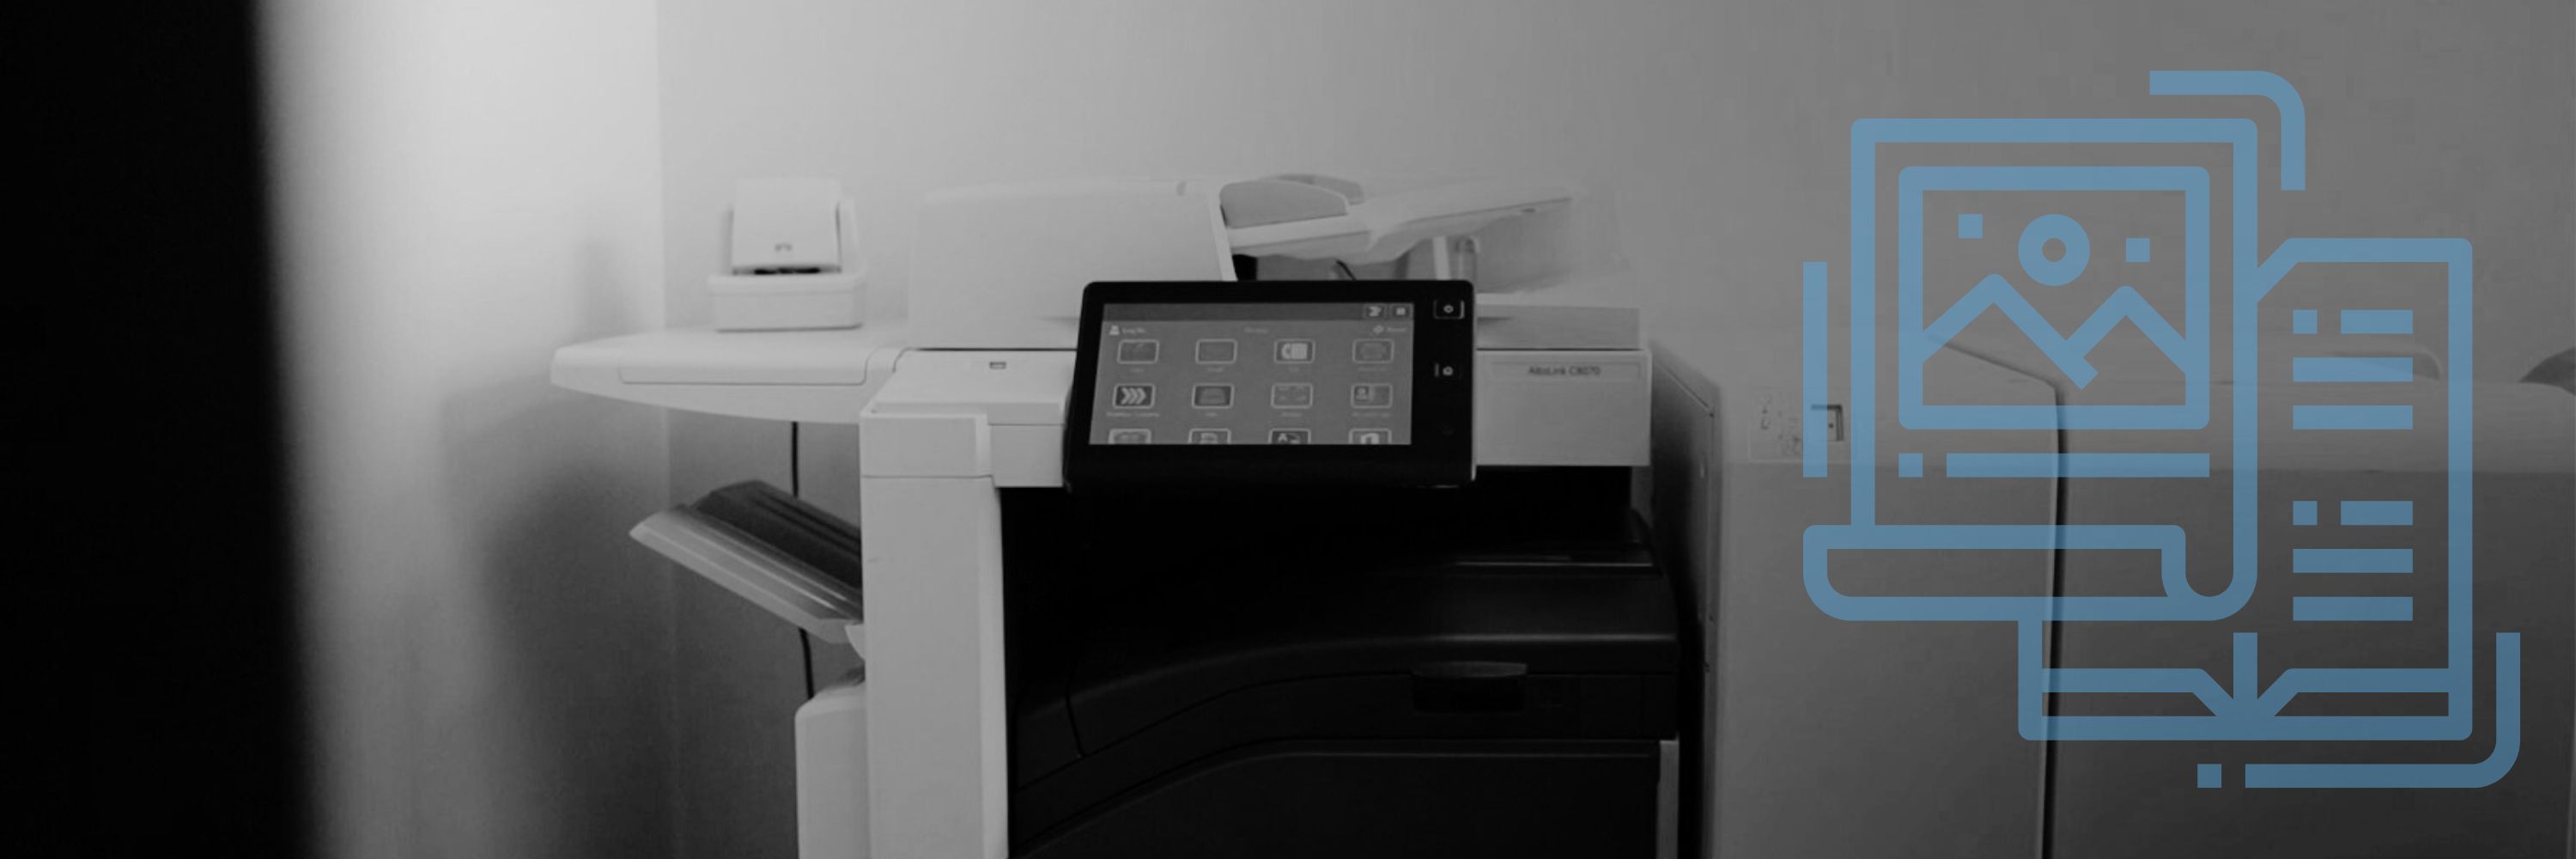 A picture of an office printer with a print media graphic on top